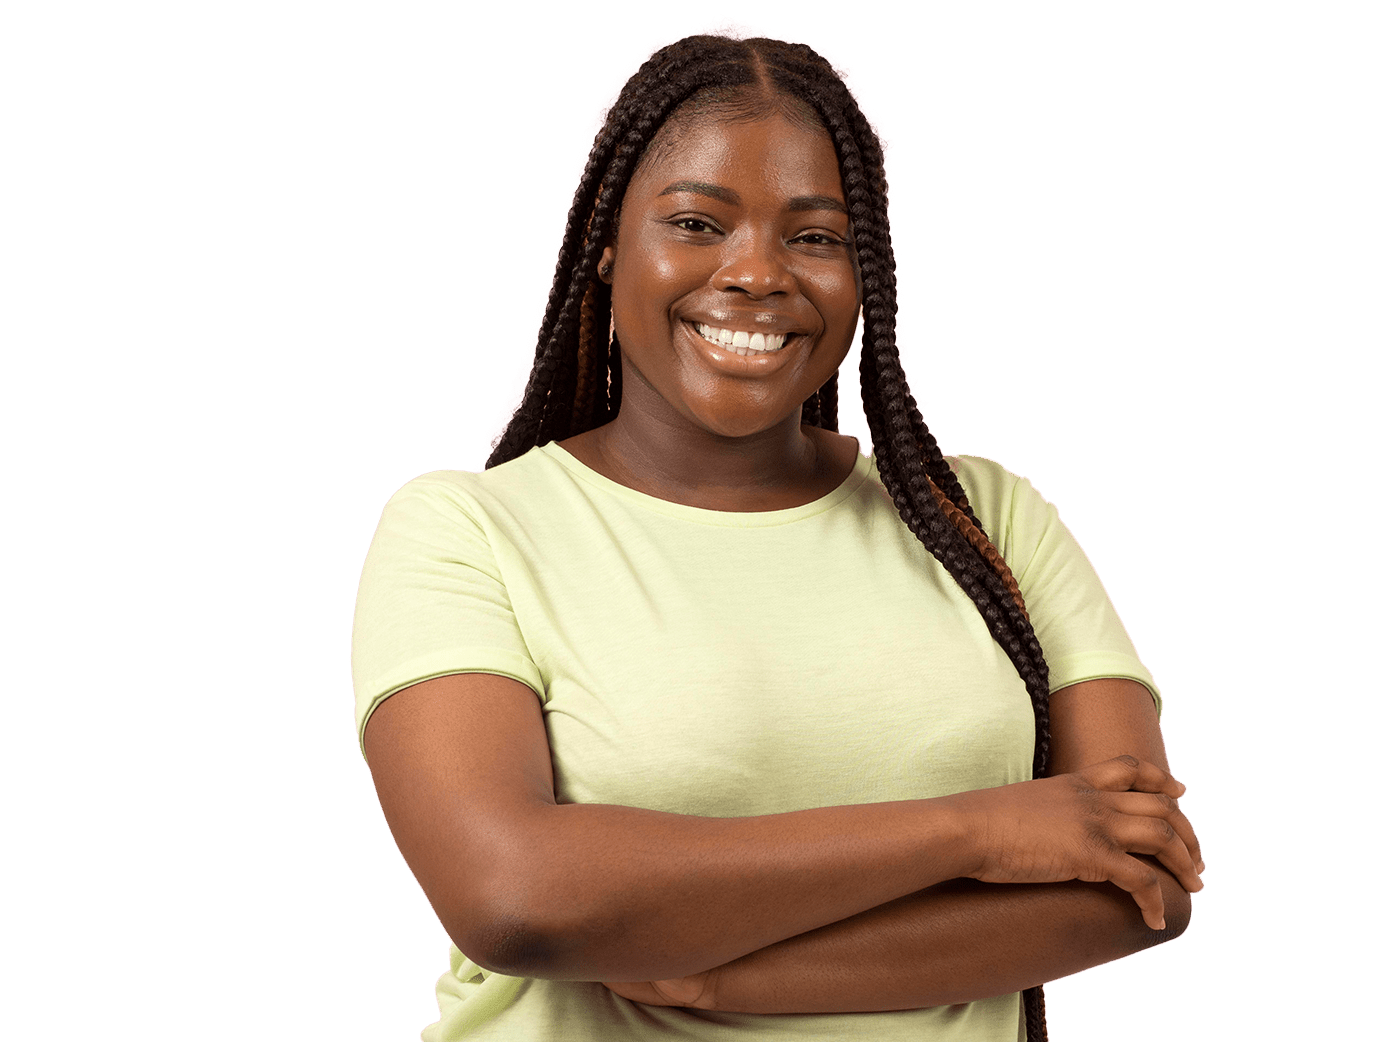 Young woman with braids in yellow shirt with arms folded